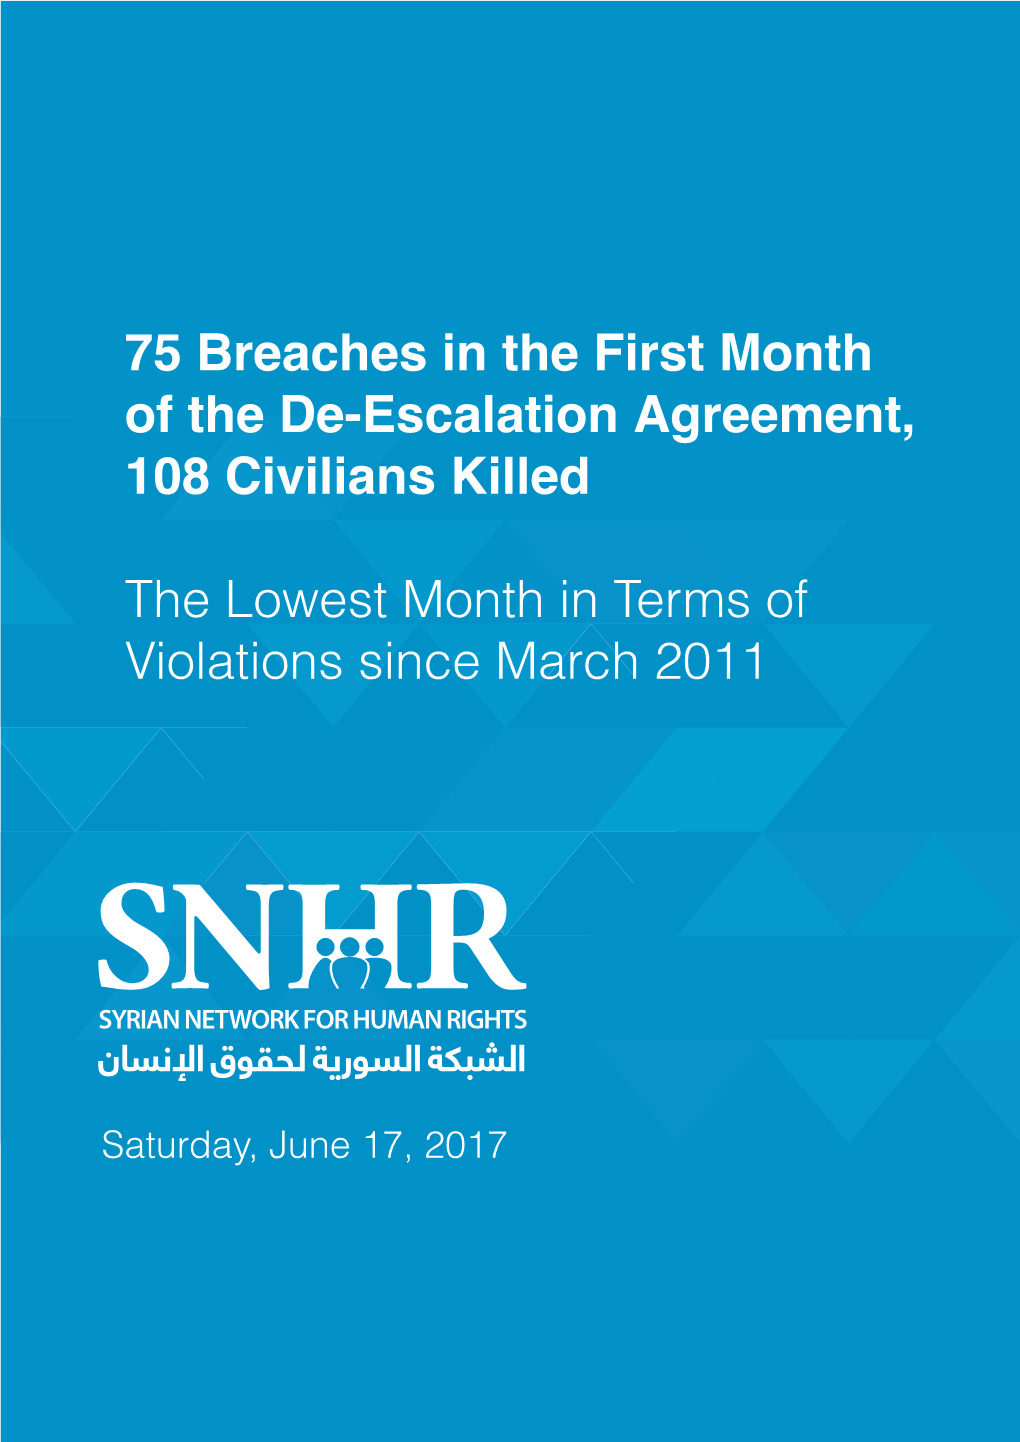 75 Breaches in the First Month of the De-Escalation Agreement, 108 Civilians Killed